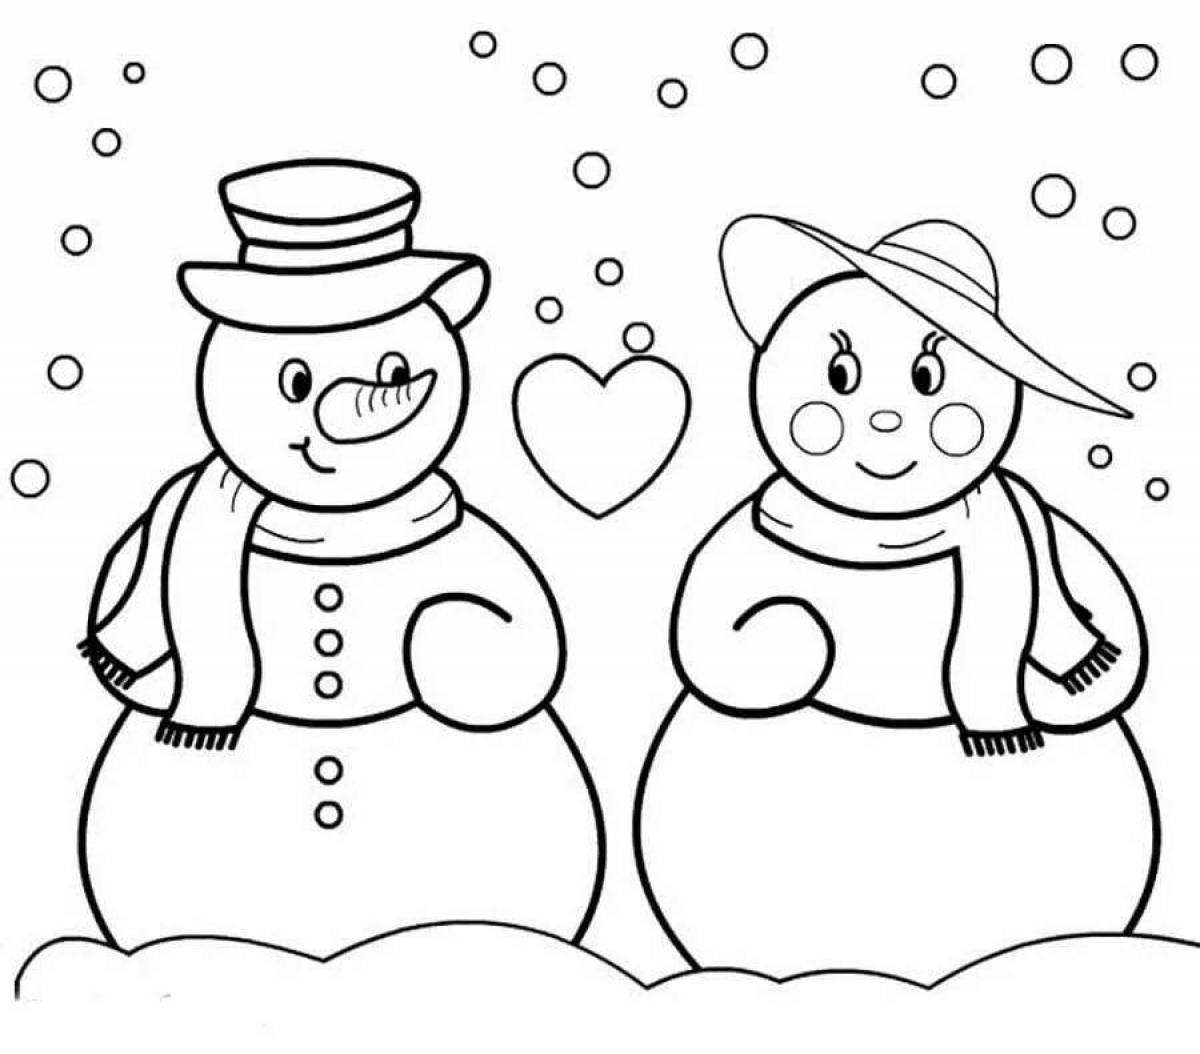 Coloring page magic snowman for birthday